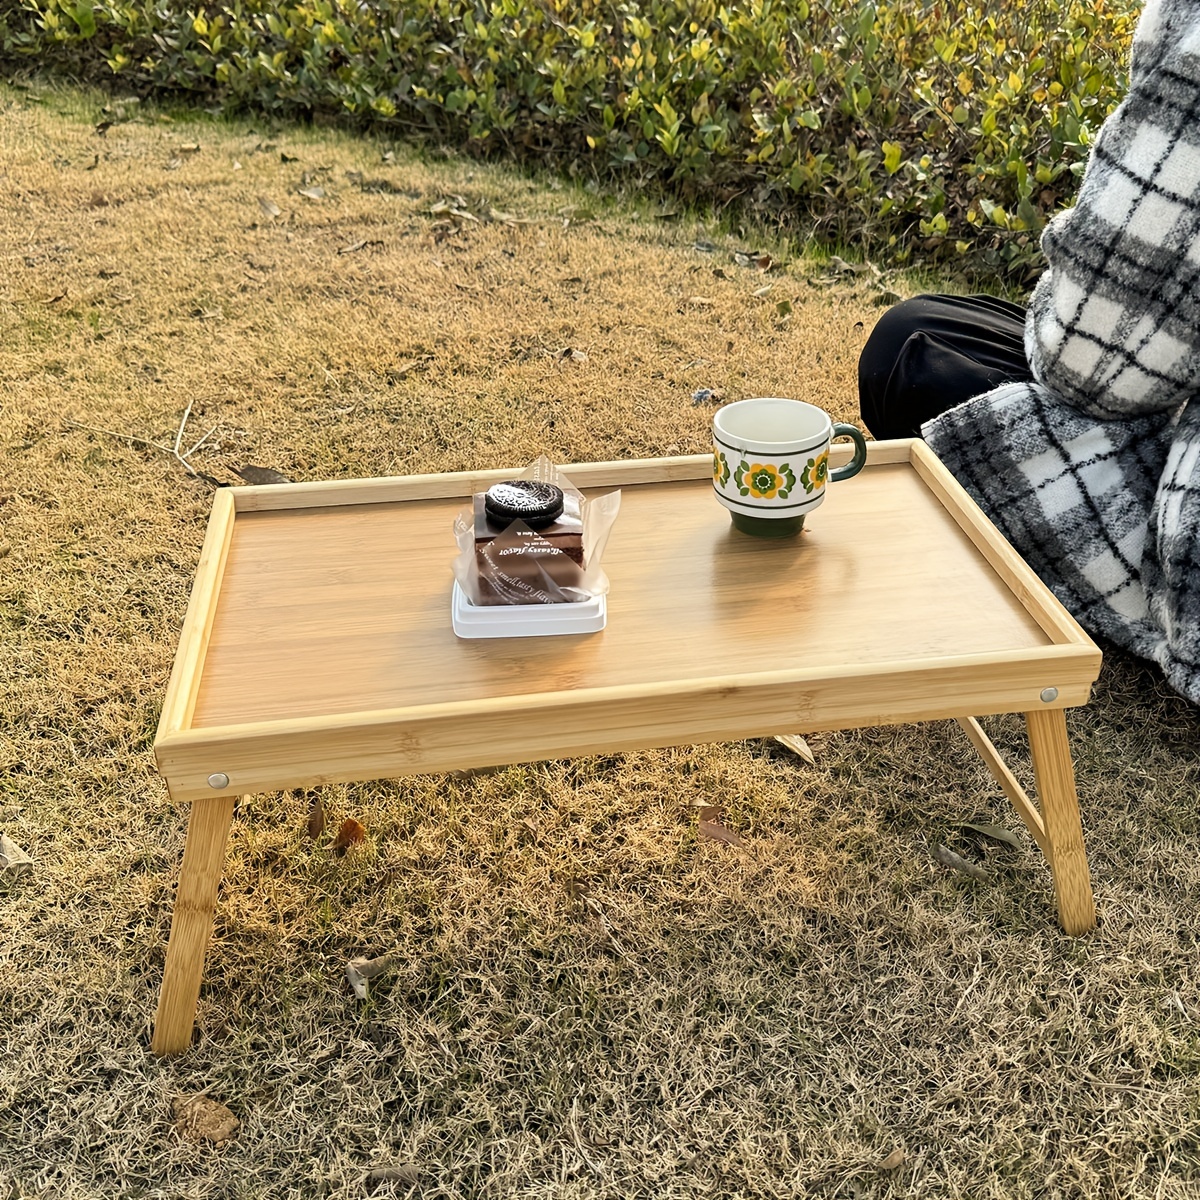 1pc folding table creative dinner plate with foot tray table for lazy bed casual computer table outdoor picnic camping table randomly   table on the sofa gift for fathers day mothers day details 7